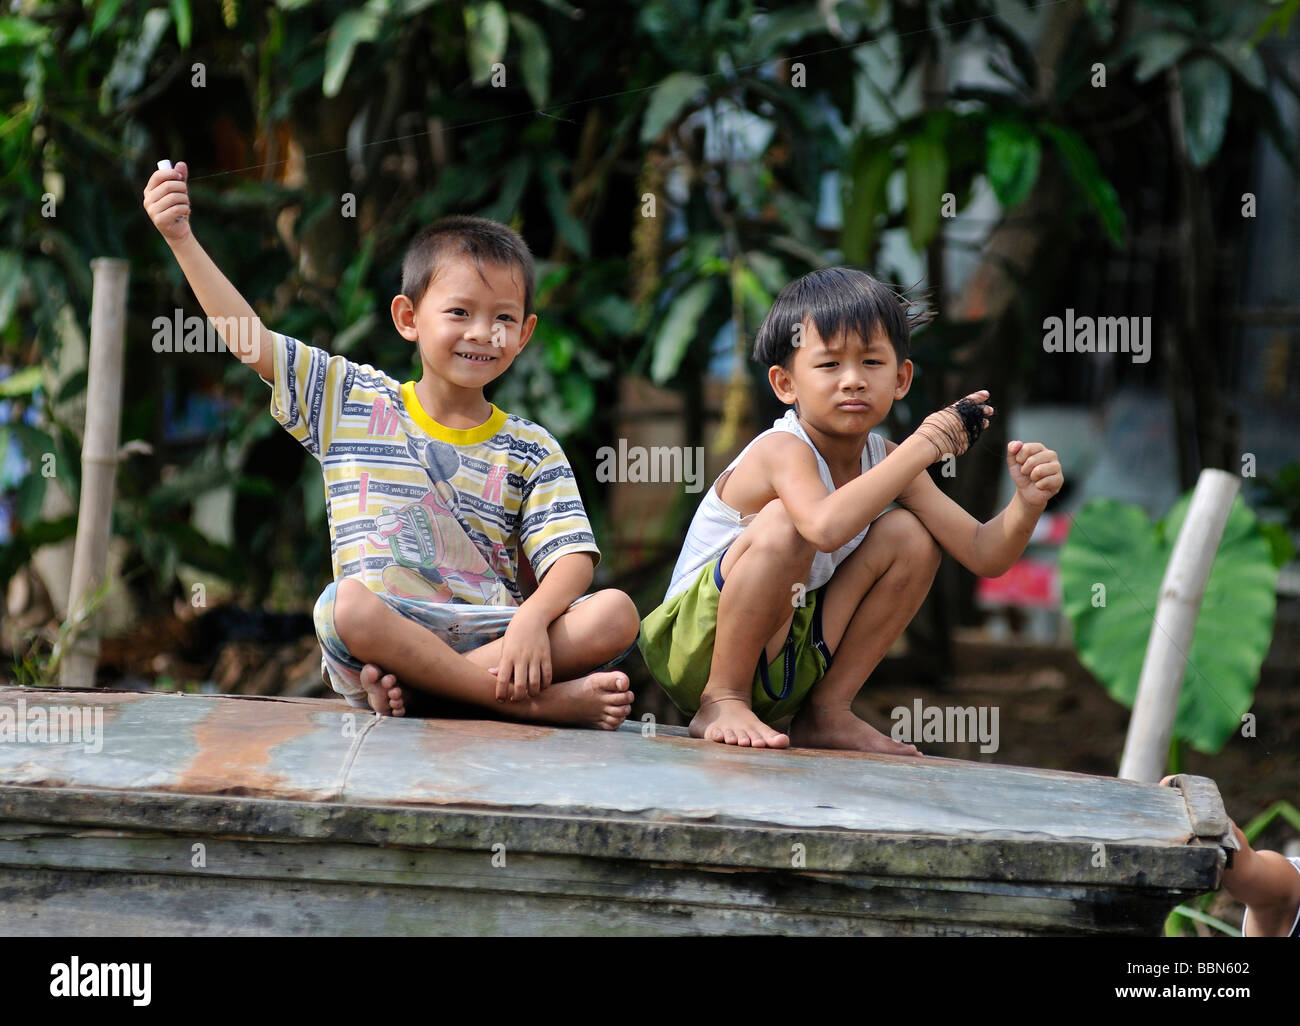 Two children sitting on a wooden roof and playing with thin strings of kites, Vietnam, Asia Stock Photo